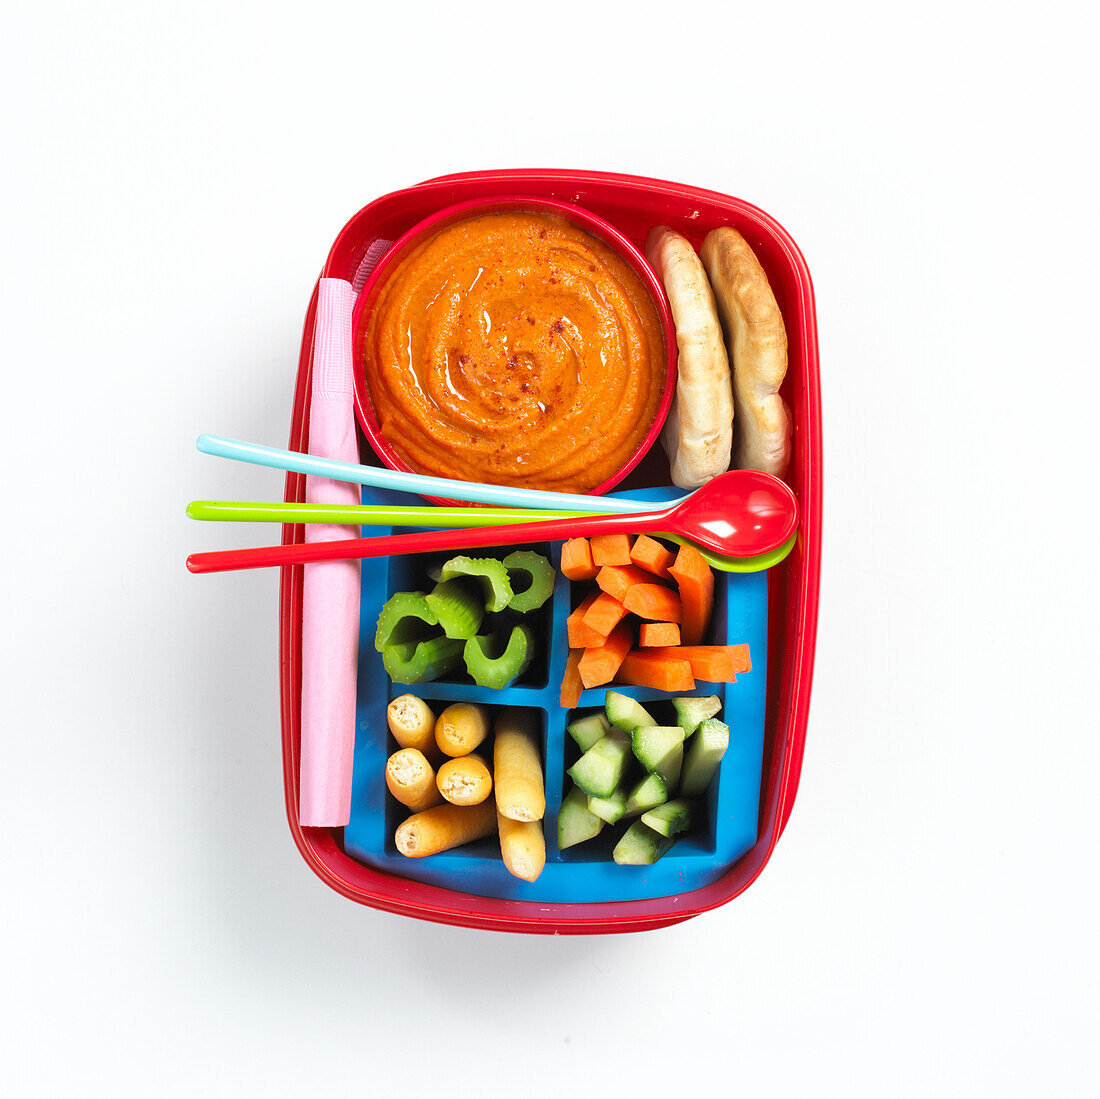 Lunch box containing vegetables, dip and bread